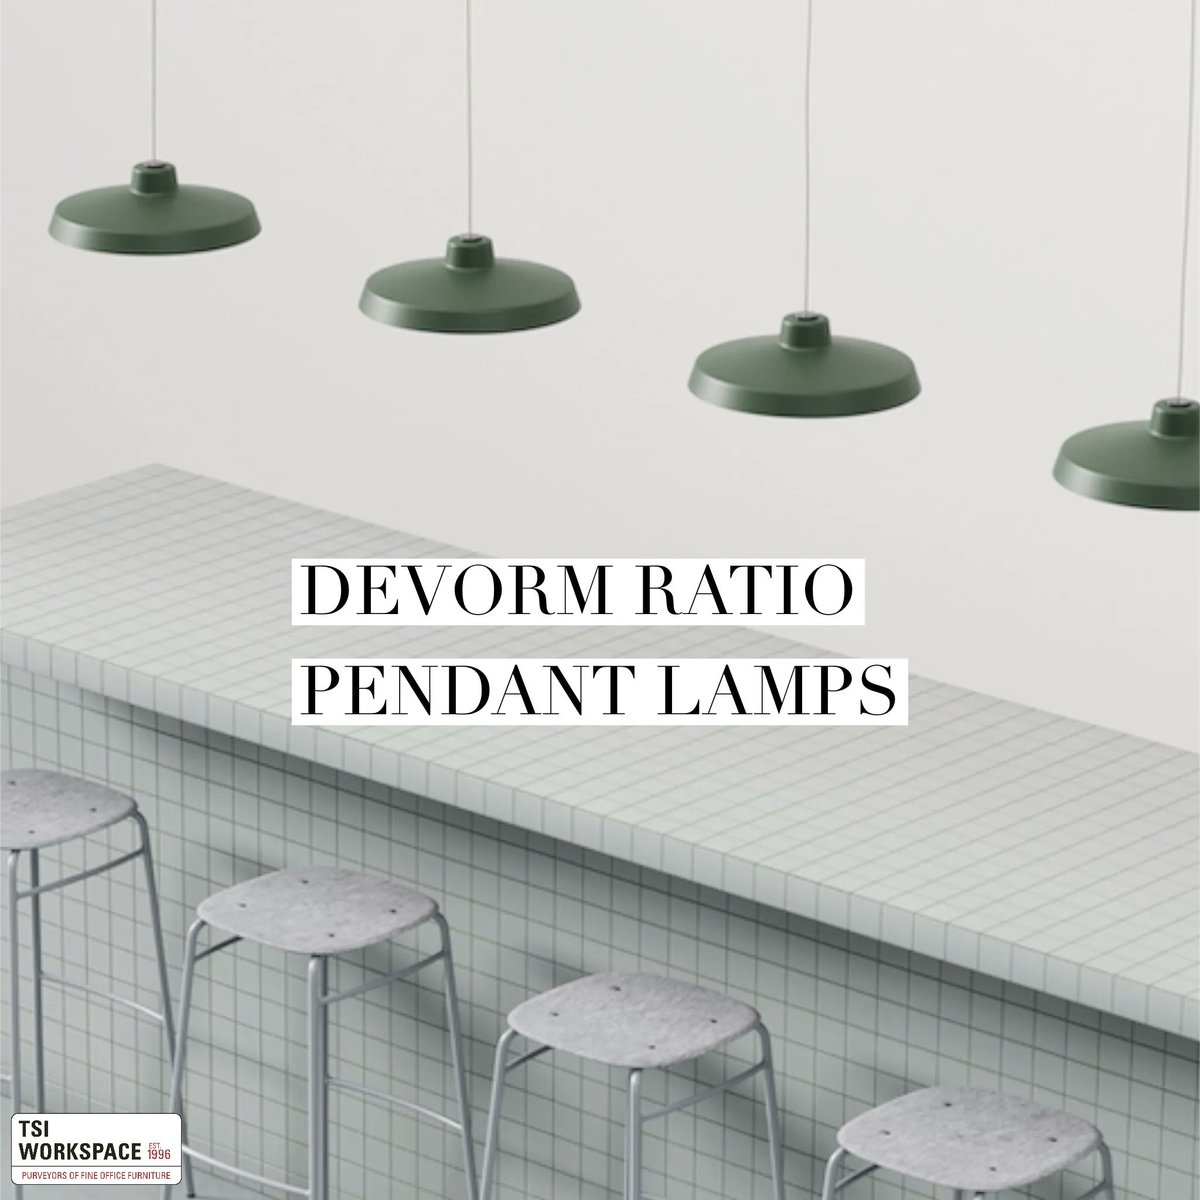 DeVorm Ratio Pendant Lamps

Ratio Pendant Lamps are the latest addition to De Vorm’s lighting collection. This high-quality steel lamp series showcases metal spinning technology’s unique capabilities

bit.ly/42Iq4Ty

#furniture #commercialfurniture #designerfurniture